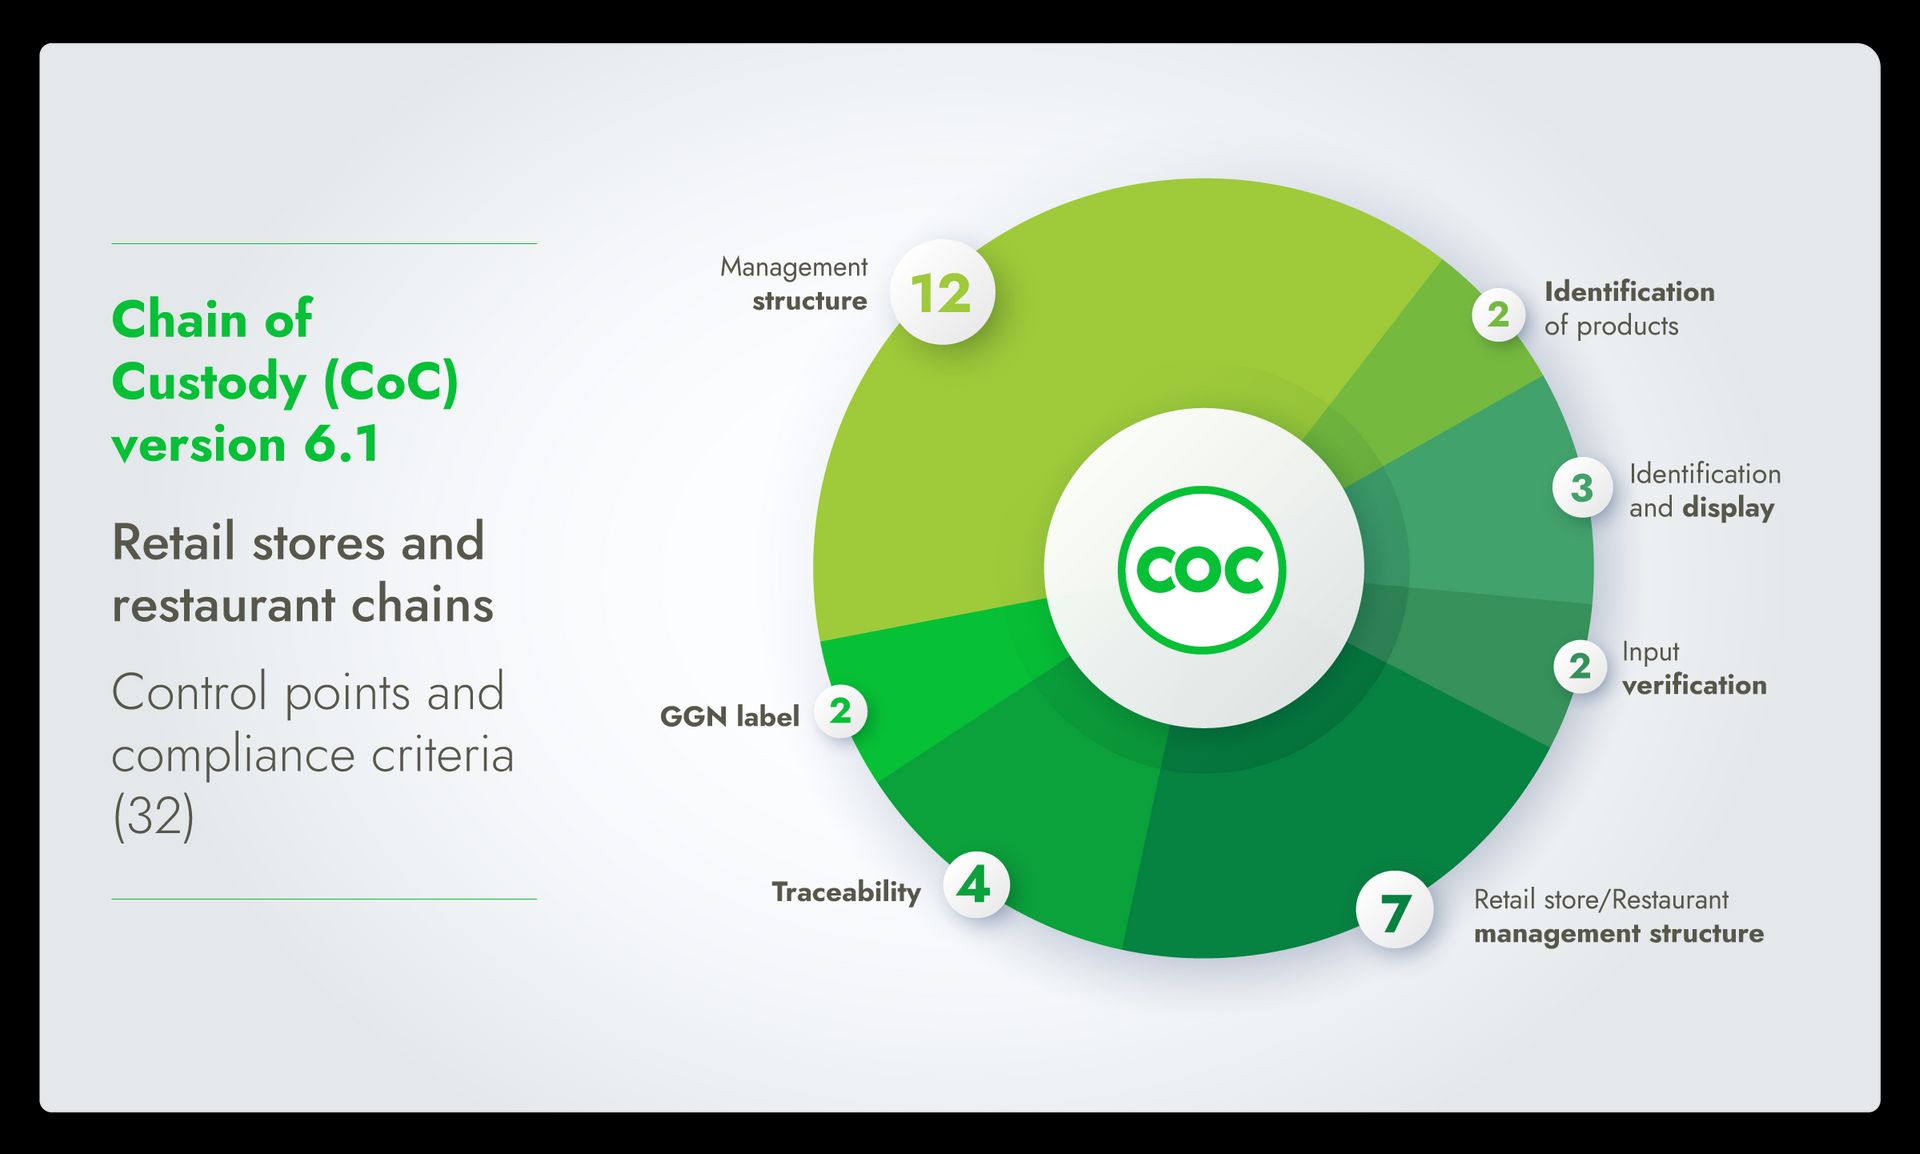 Infographic showing the control points and compliance criteria of GLOBALG.A.P. Chain of Custody version 6.1